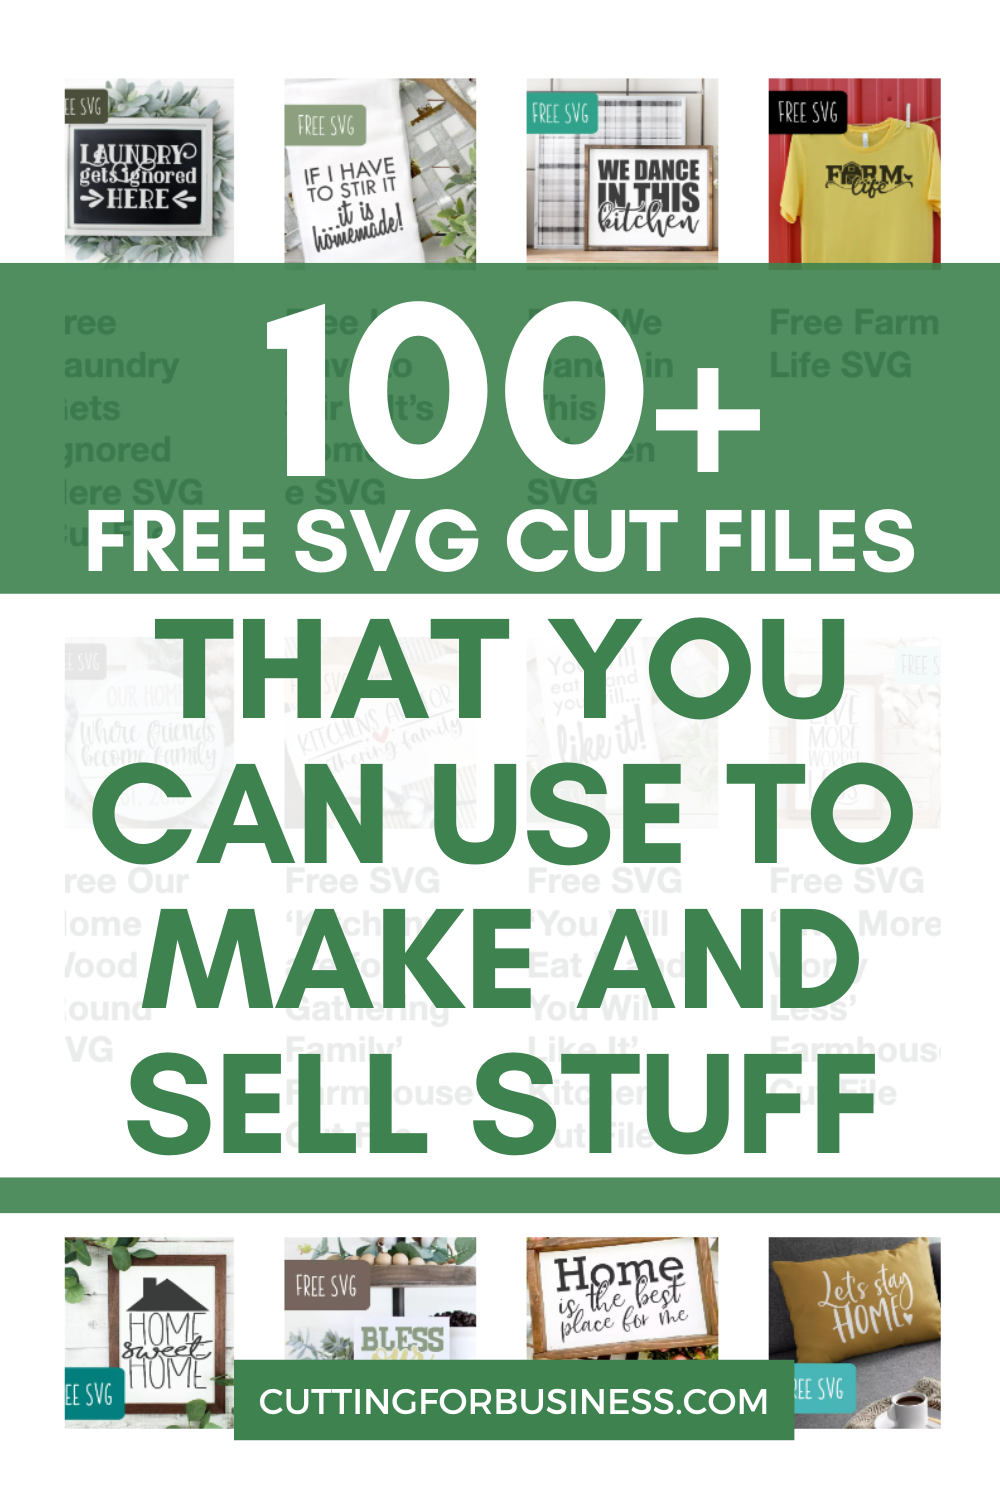 100+ free commercial use cut files for Silhouette, Cricut, Brother, Juliet, Romeo, and xTool - cuttingforbusiness.com.